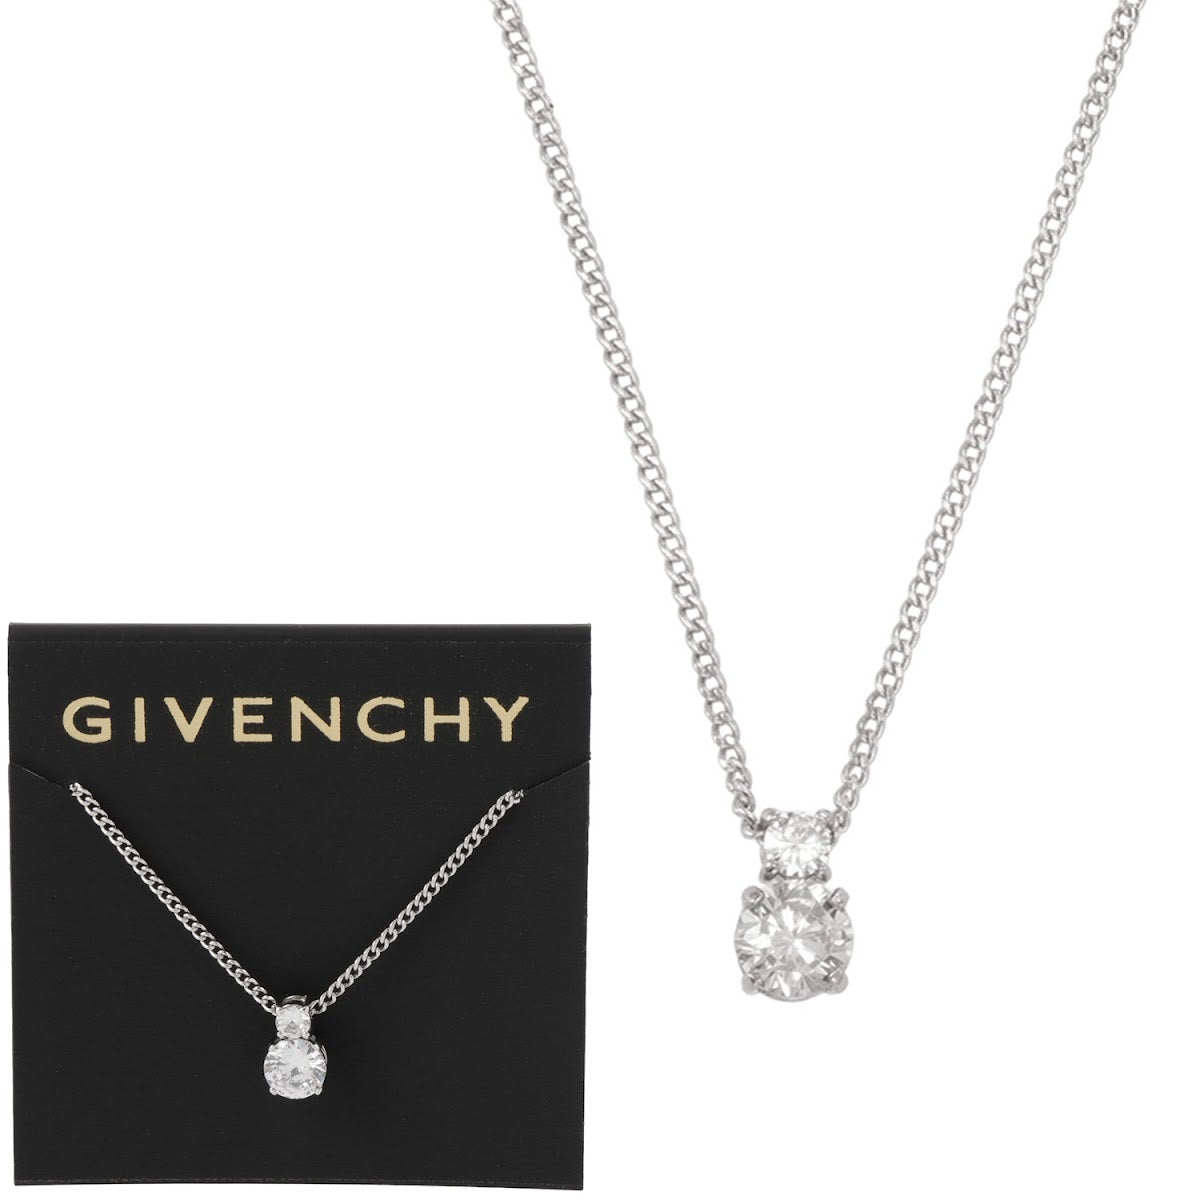 Givenchy GIVENCHY 12129485-1 Crystal Pendant Necklace Silver Ladies Gi